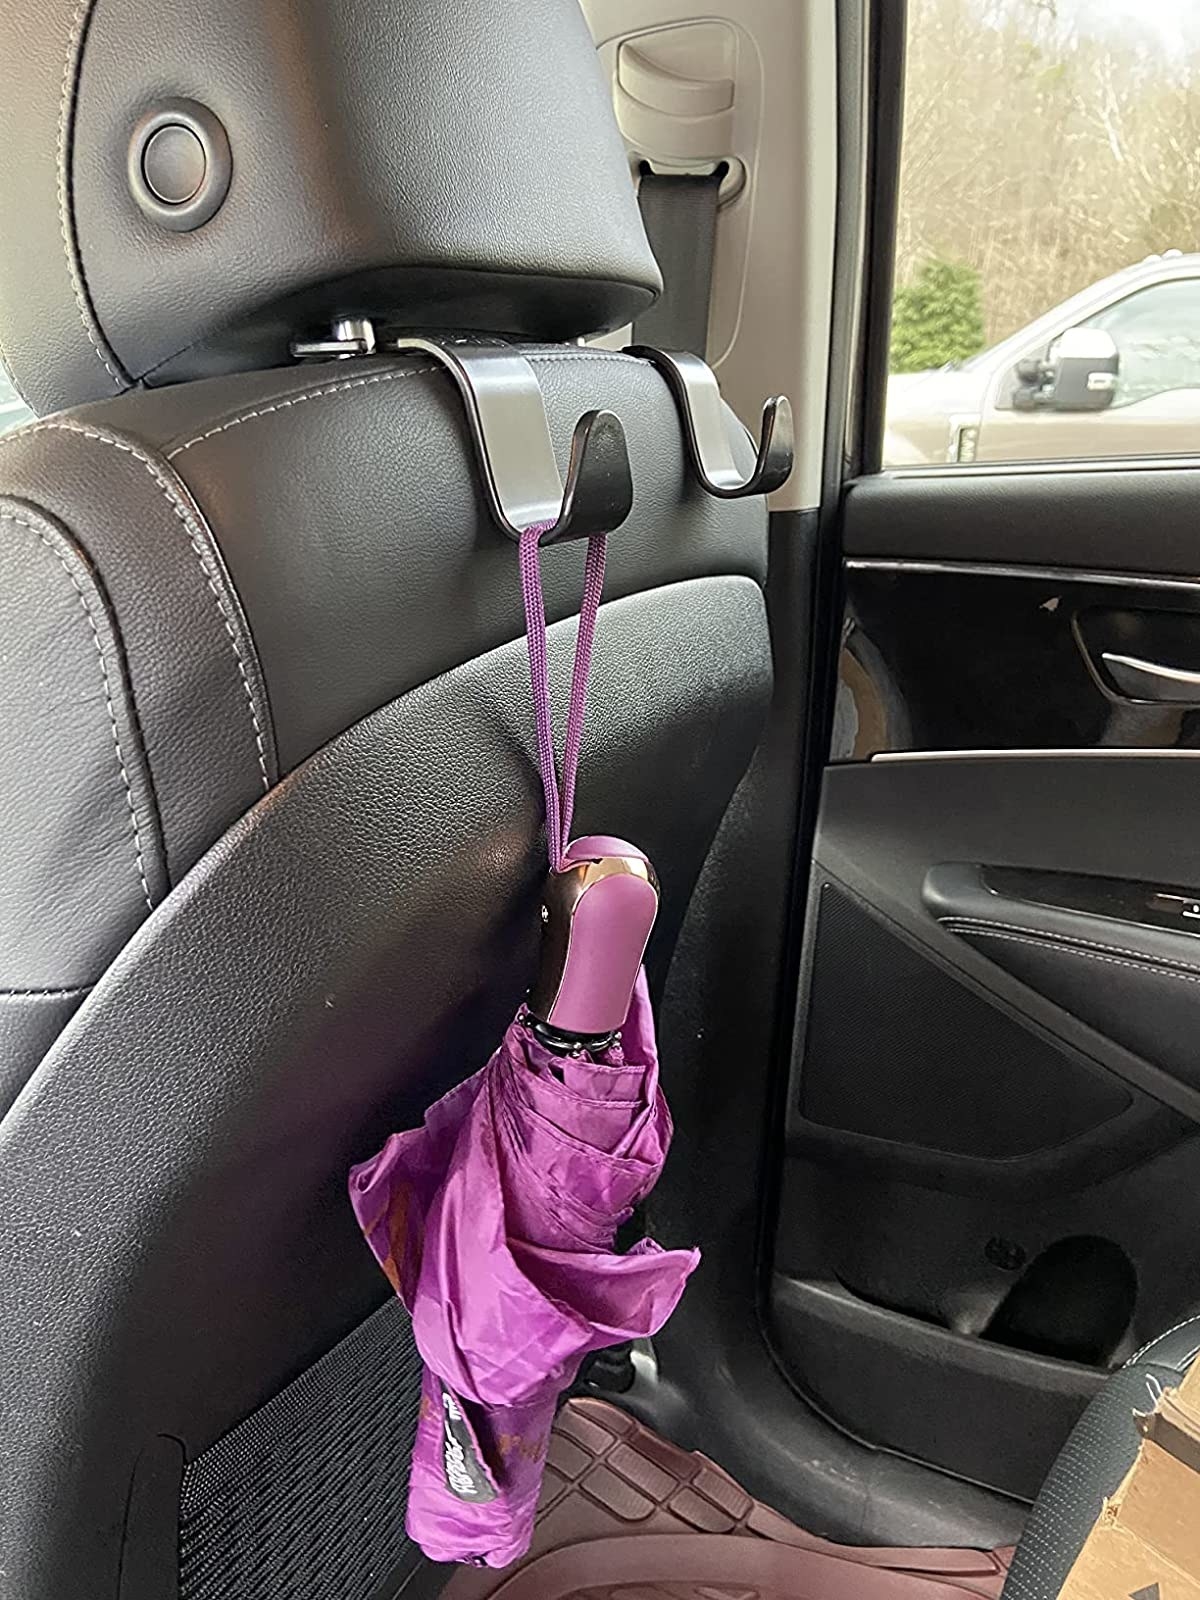 Reviewer image of an umbrella hanging on the car hook